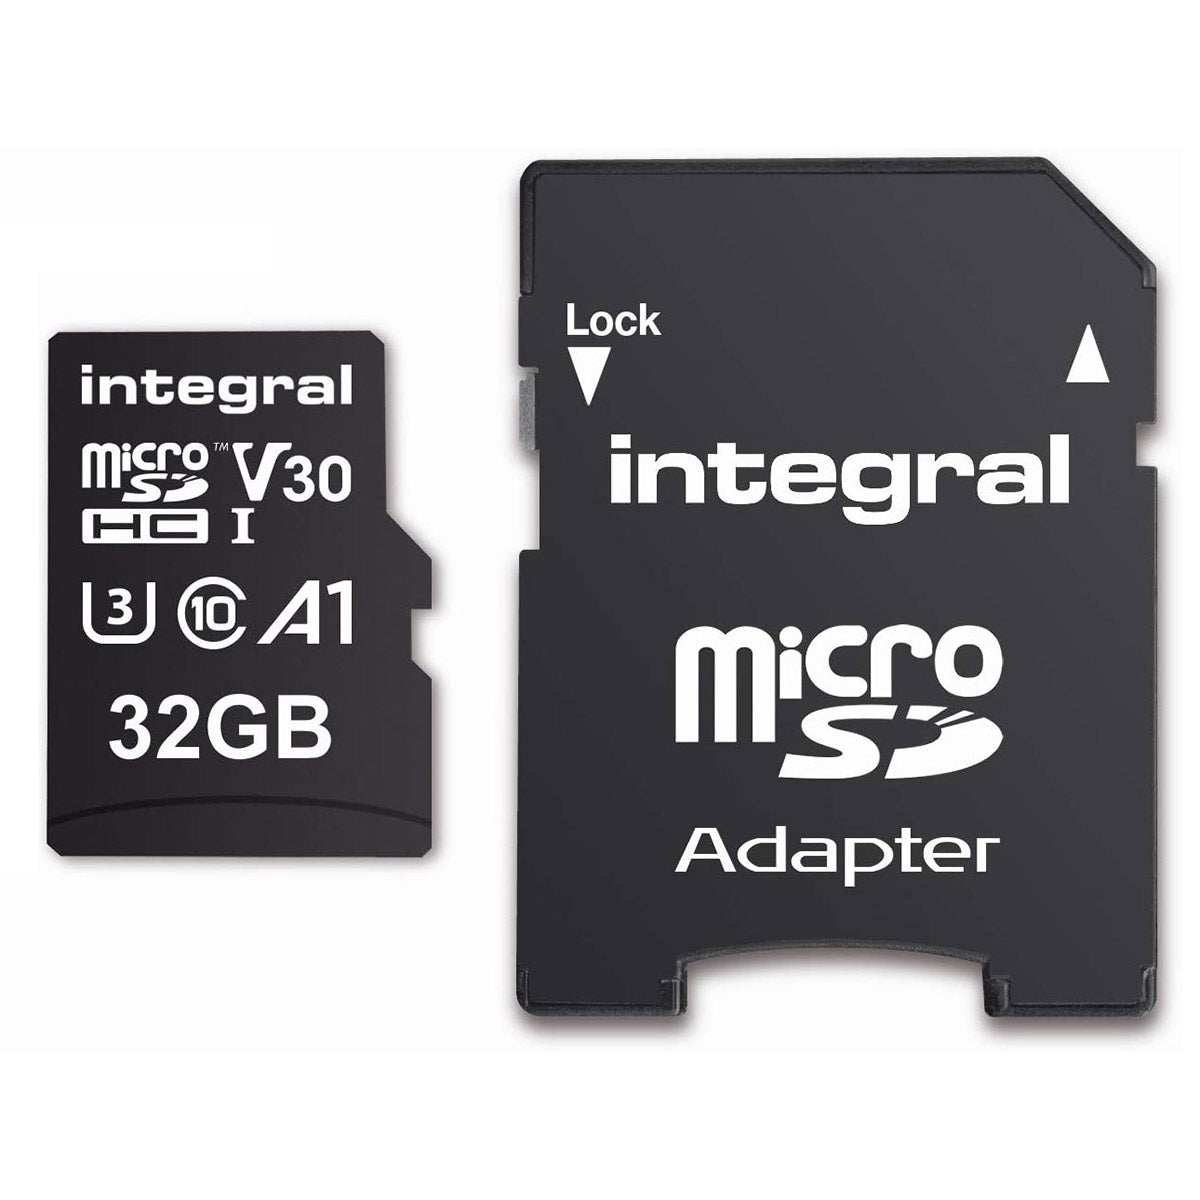 Integral 32GB High Speed V30 UHS-I U3 Class 10 MicroSDHC Memory Card with Adapter - maplin.co.uk